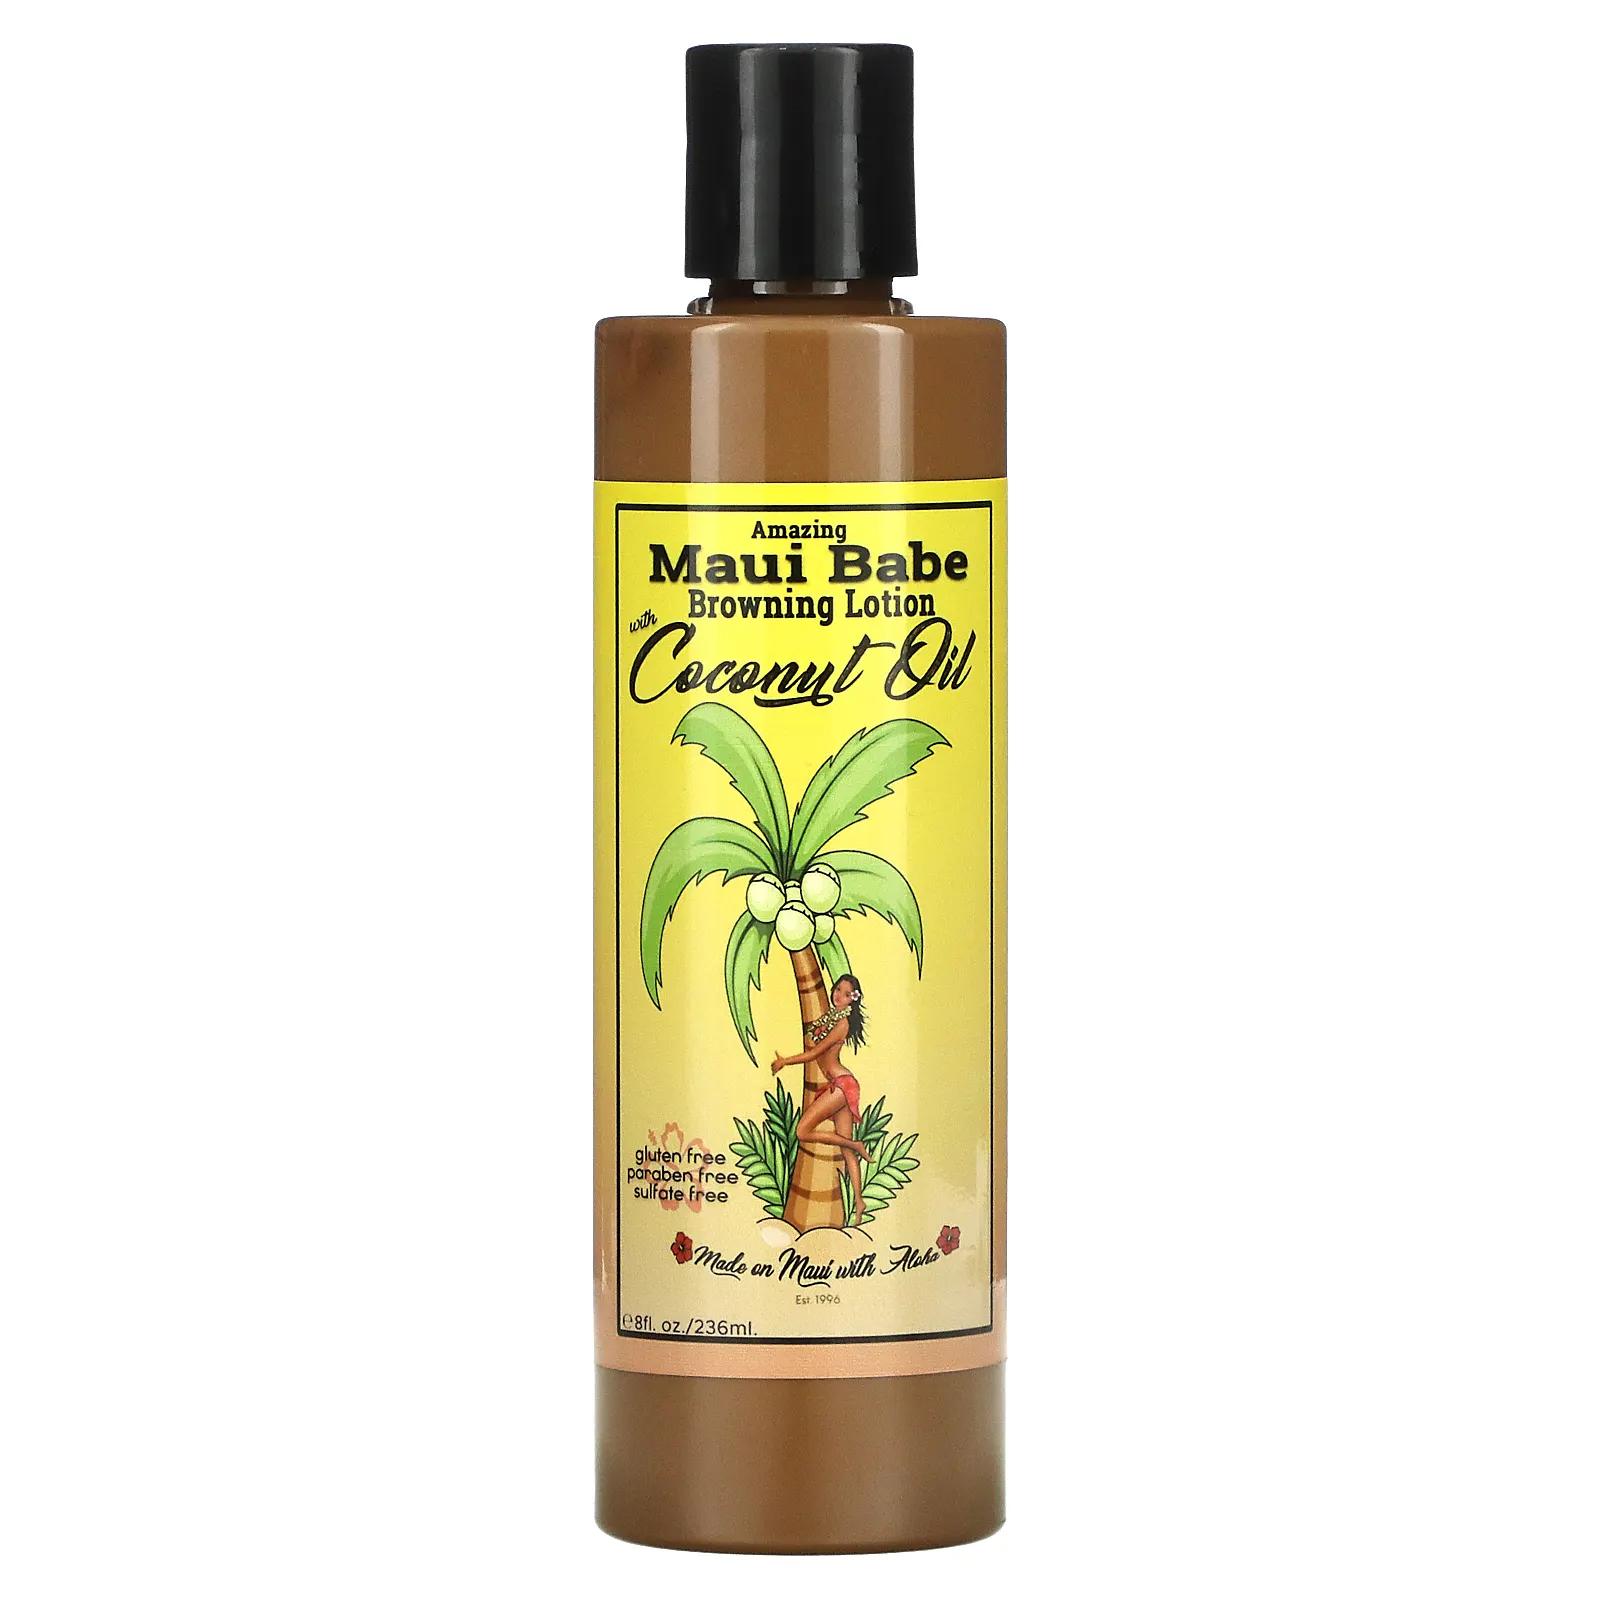 Maui Babe Amazing Browning Lotion with Coconut Oil 8 fl oz (236 ml) maui babe amazing browning lotion лосьон для загара 236 мл